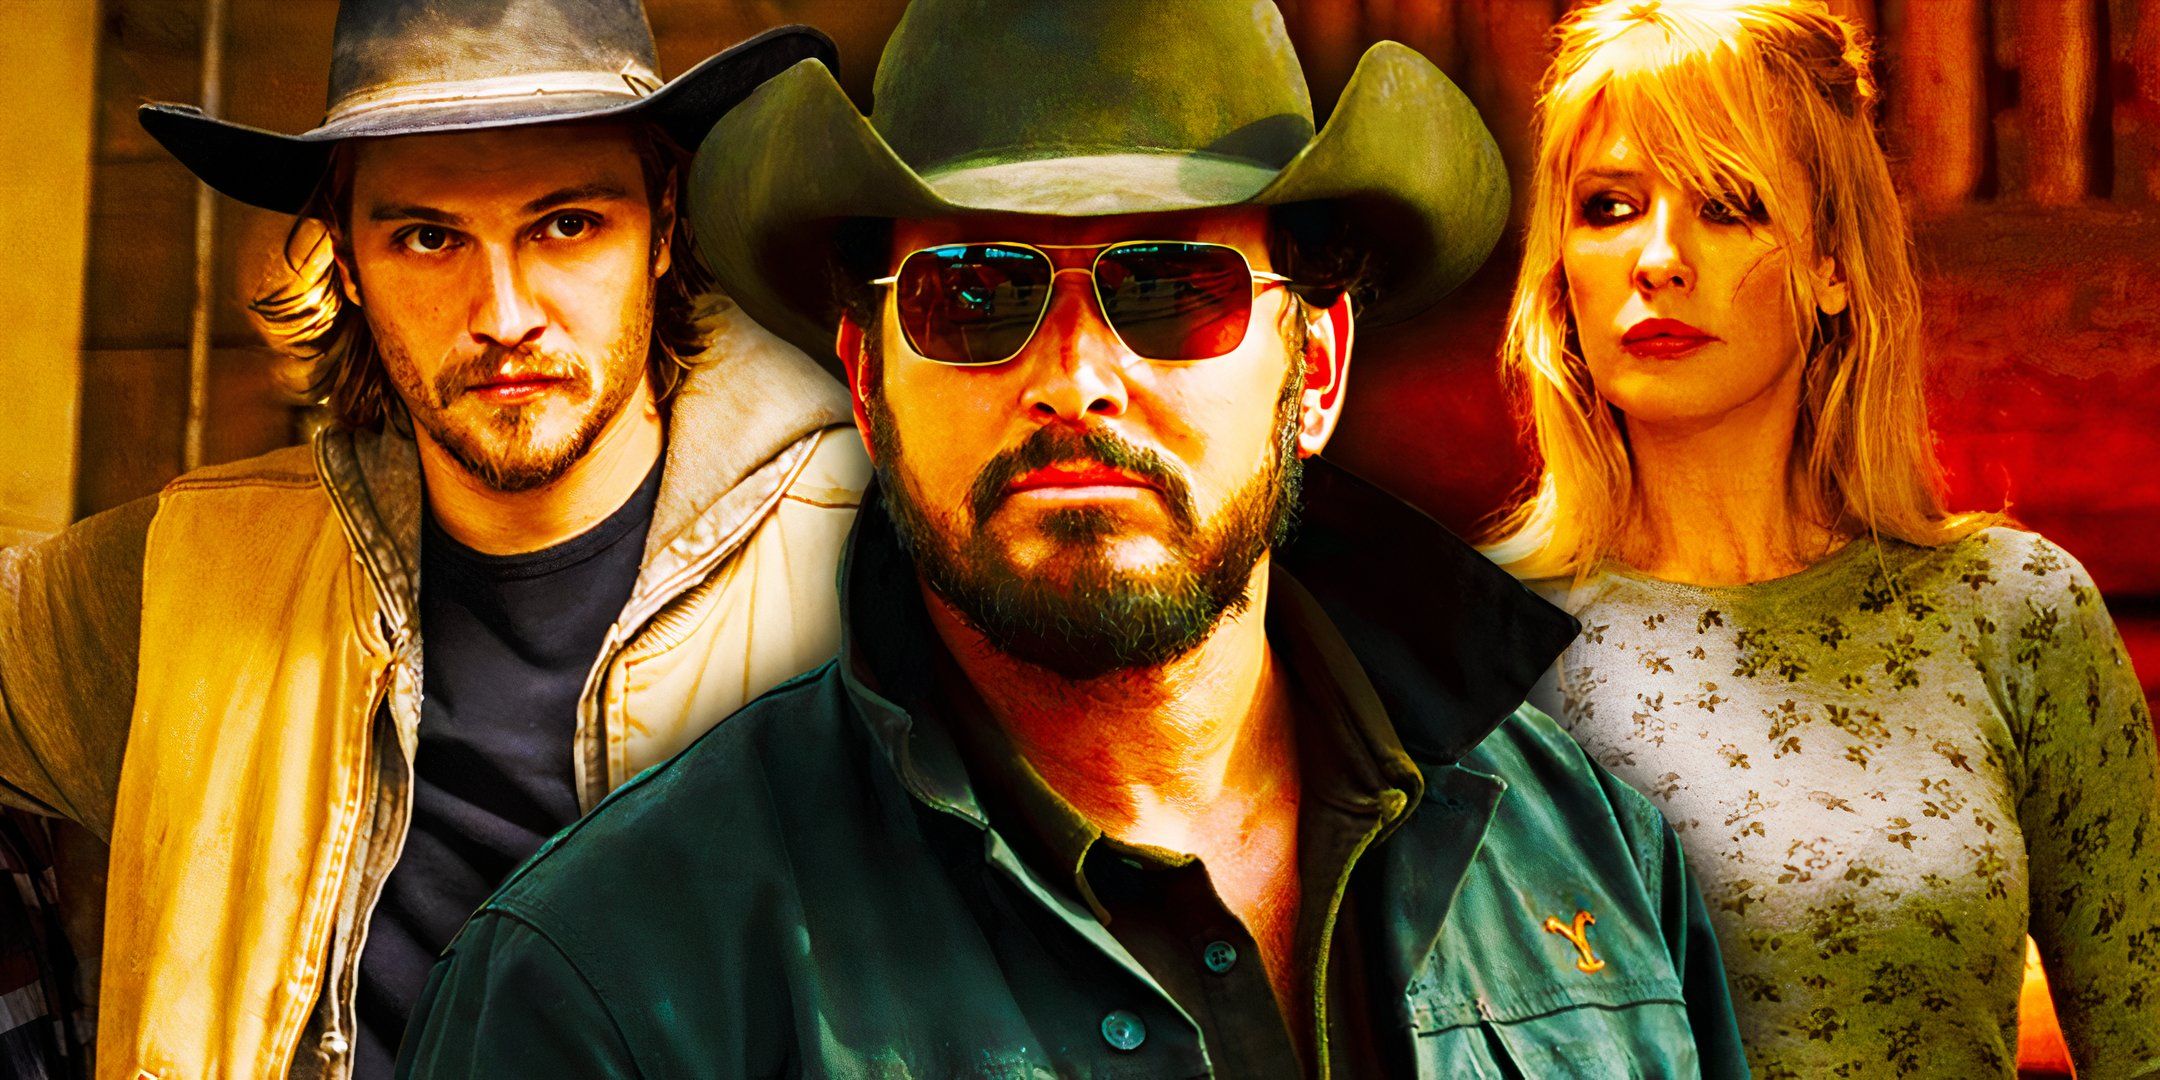 Cole Hauser as Rip Wheeler, Kelly Reilly as Beth Dutton, and Luke Grimes as Kayce Dutton in Yellowstone.